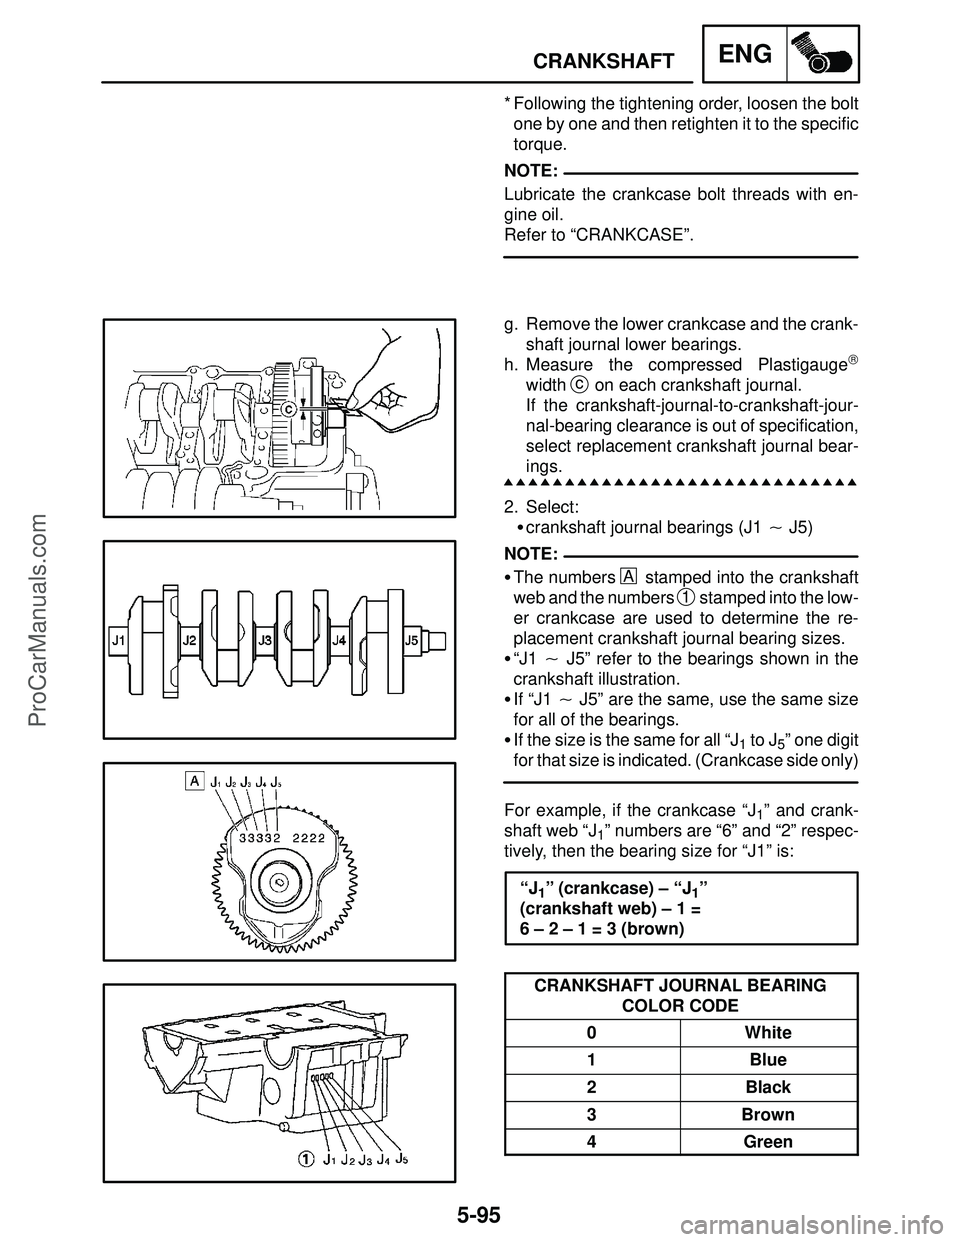 YAMAHA YZF-R1S 2004  Service Manual 5-95
CRANKSHAFTENG
NOTE:
NOTE:
* Following the tightening order, loosen the bolt
one by one and then retighten it to the specific
torque.
Lubricate the crankcase bolt threads with en-
gine oil.
Refer 